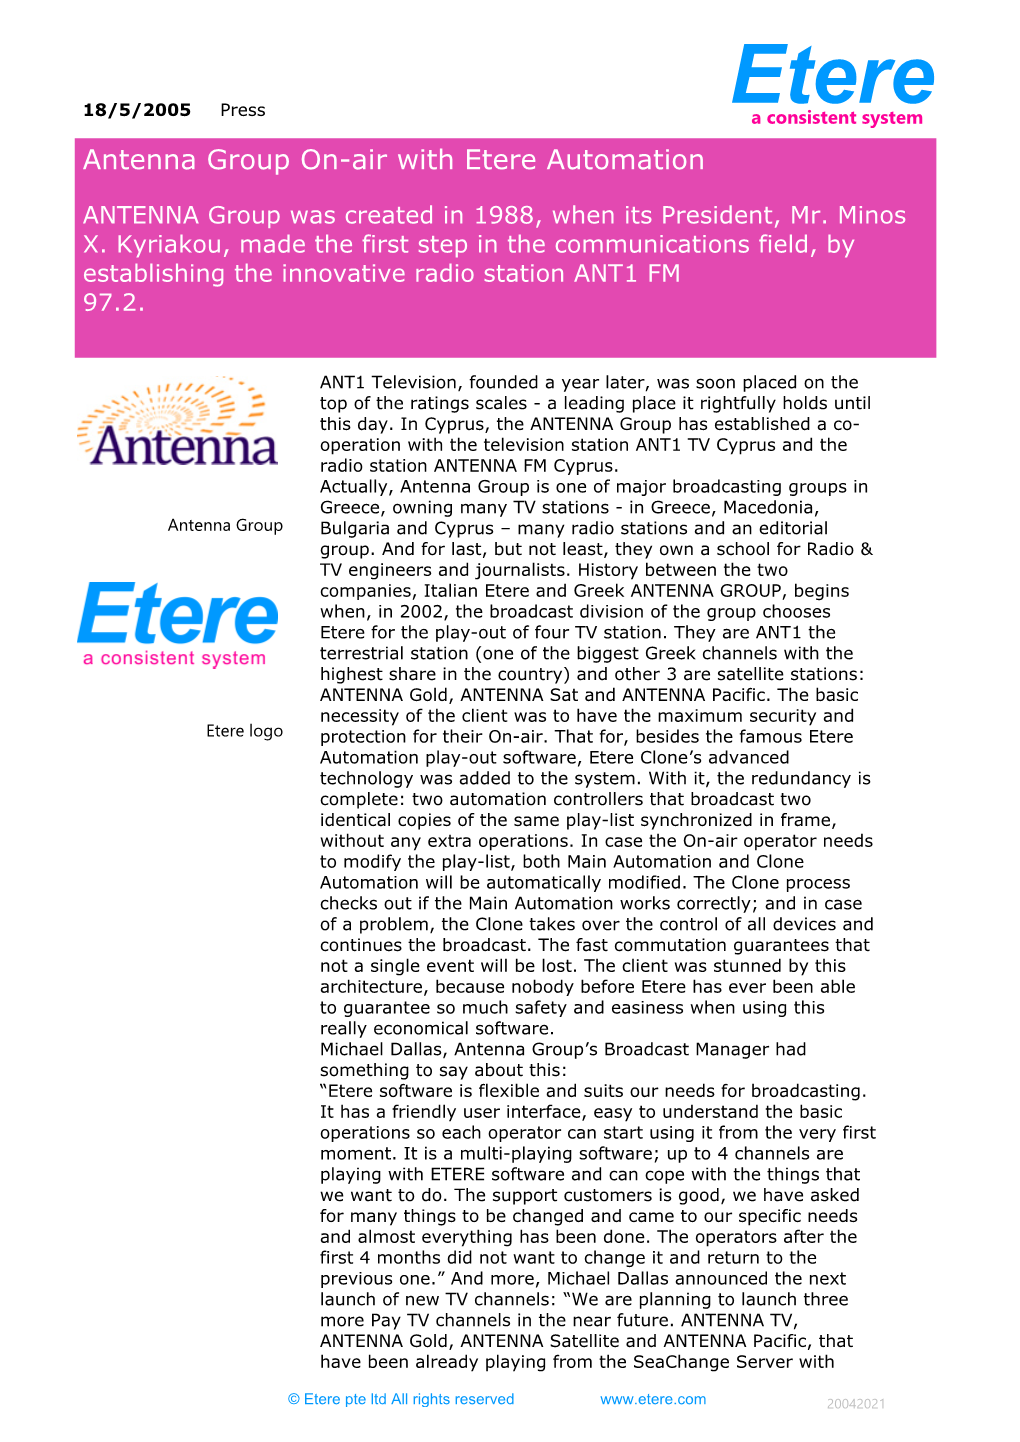 Antenna Group On-Air with Etere Automation